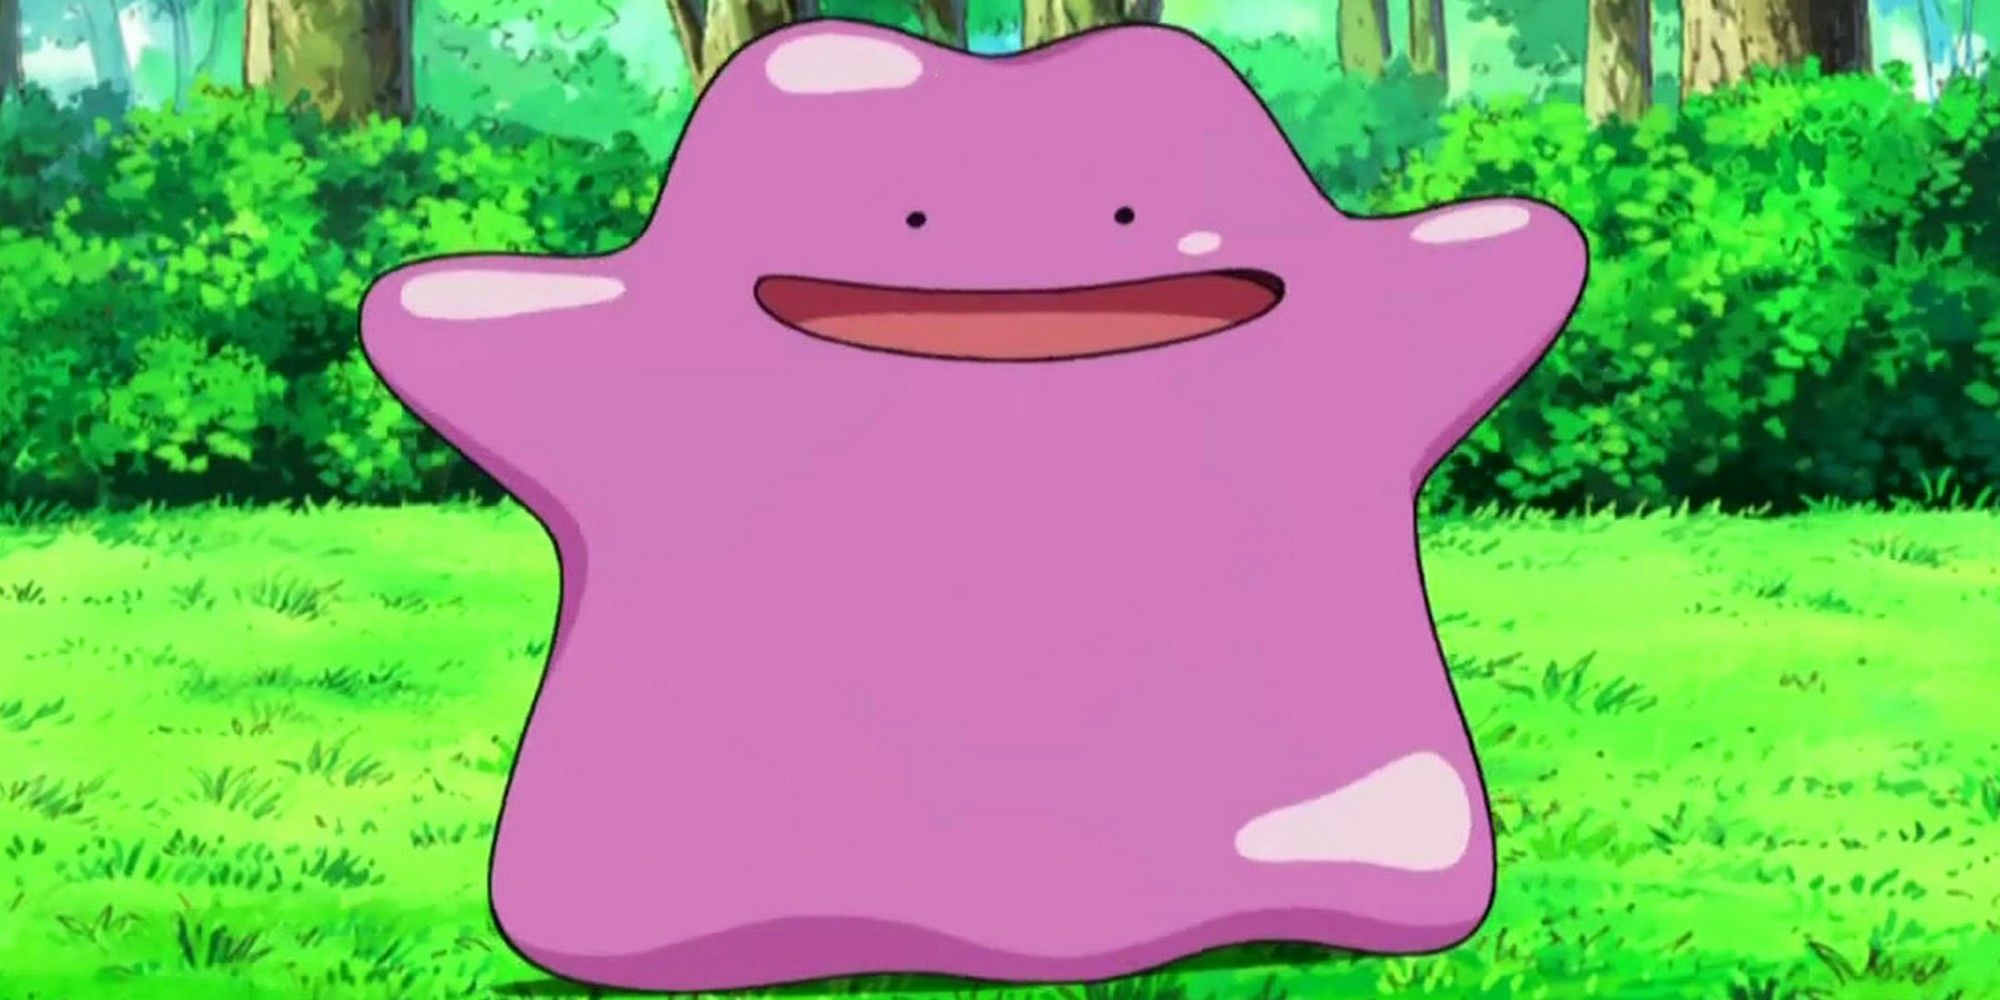 the Pokemon Ditto outdoors in the grass in the Pokemon anime